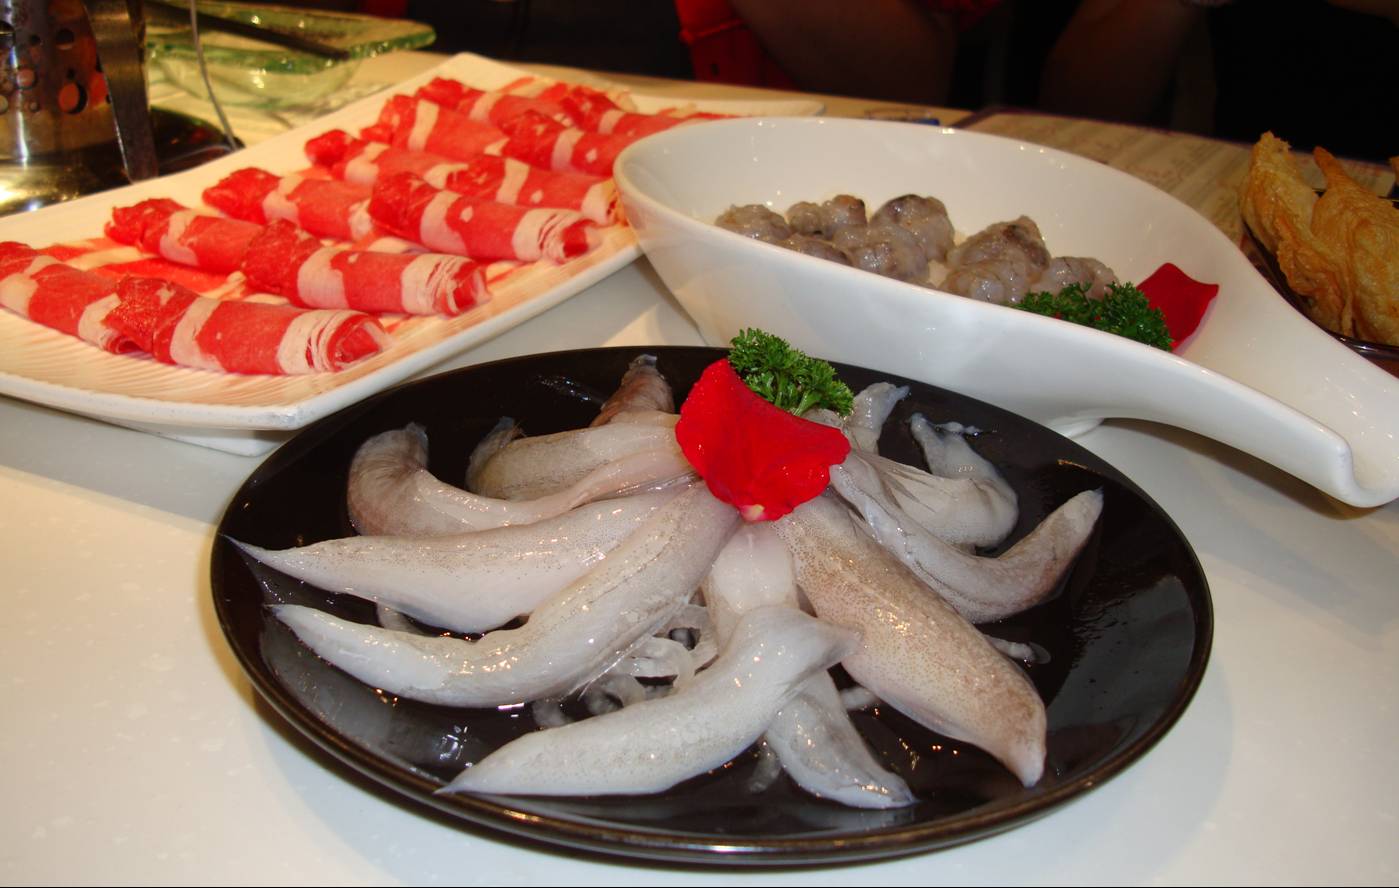 Picture:  Hotpot raw ingredients.  The forground is some kind of fish with tiny edible bones.  Not shown are the tofu, mushrooms, and veggies.  Wuxi, China